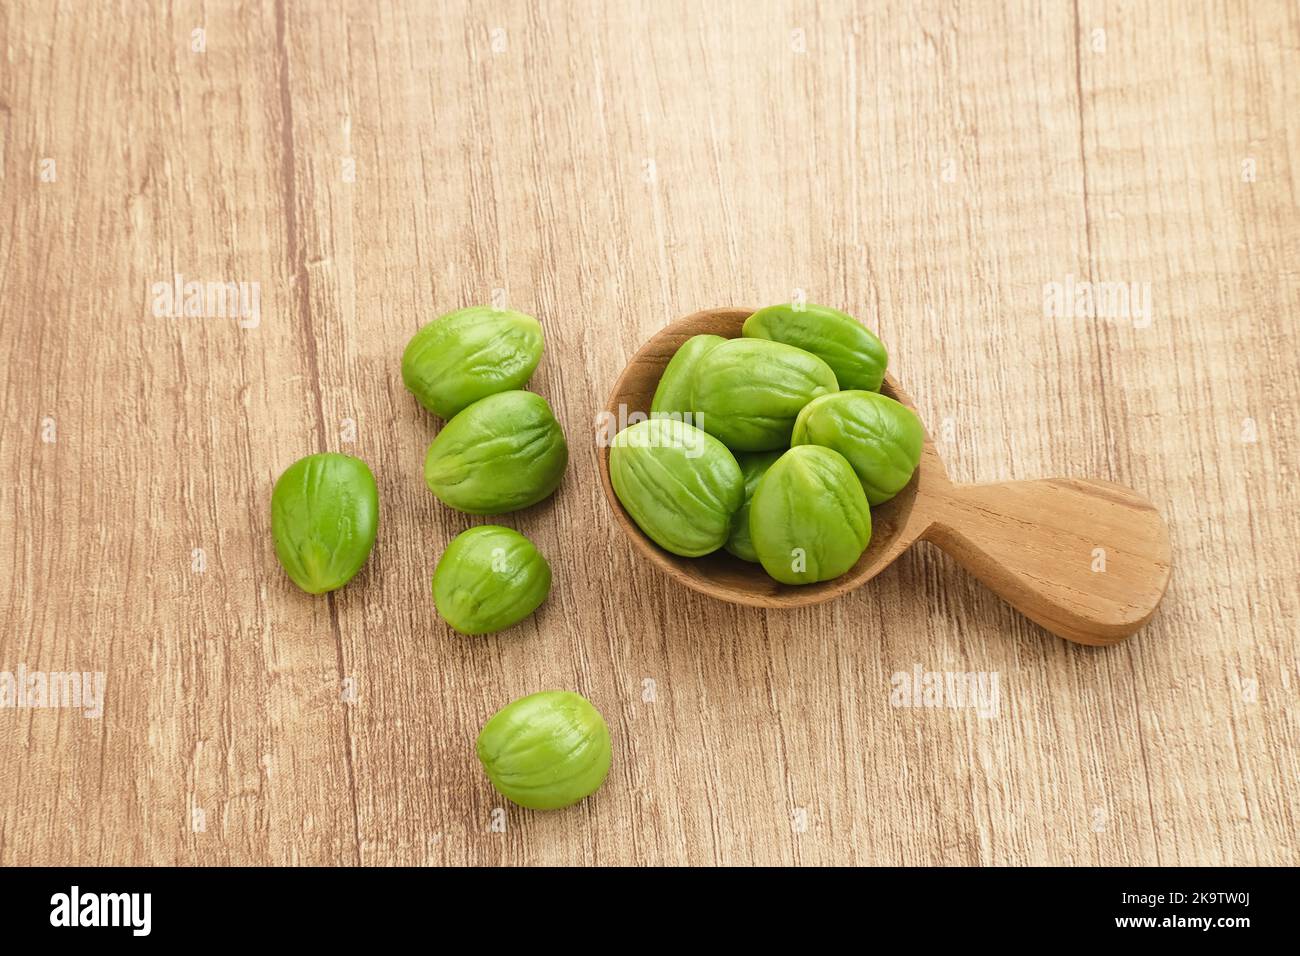 Pete or Petai beans, usually eaten raw or for other cooking ingredients. Popularly known as stink bean. Stock Photo